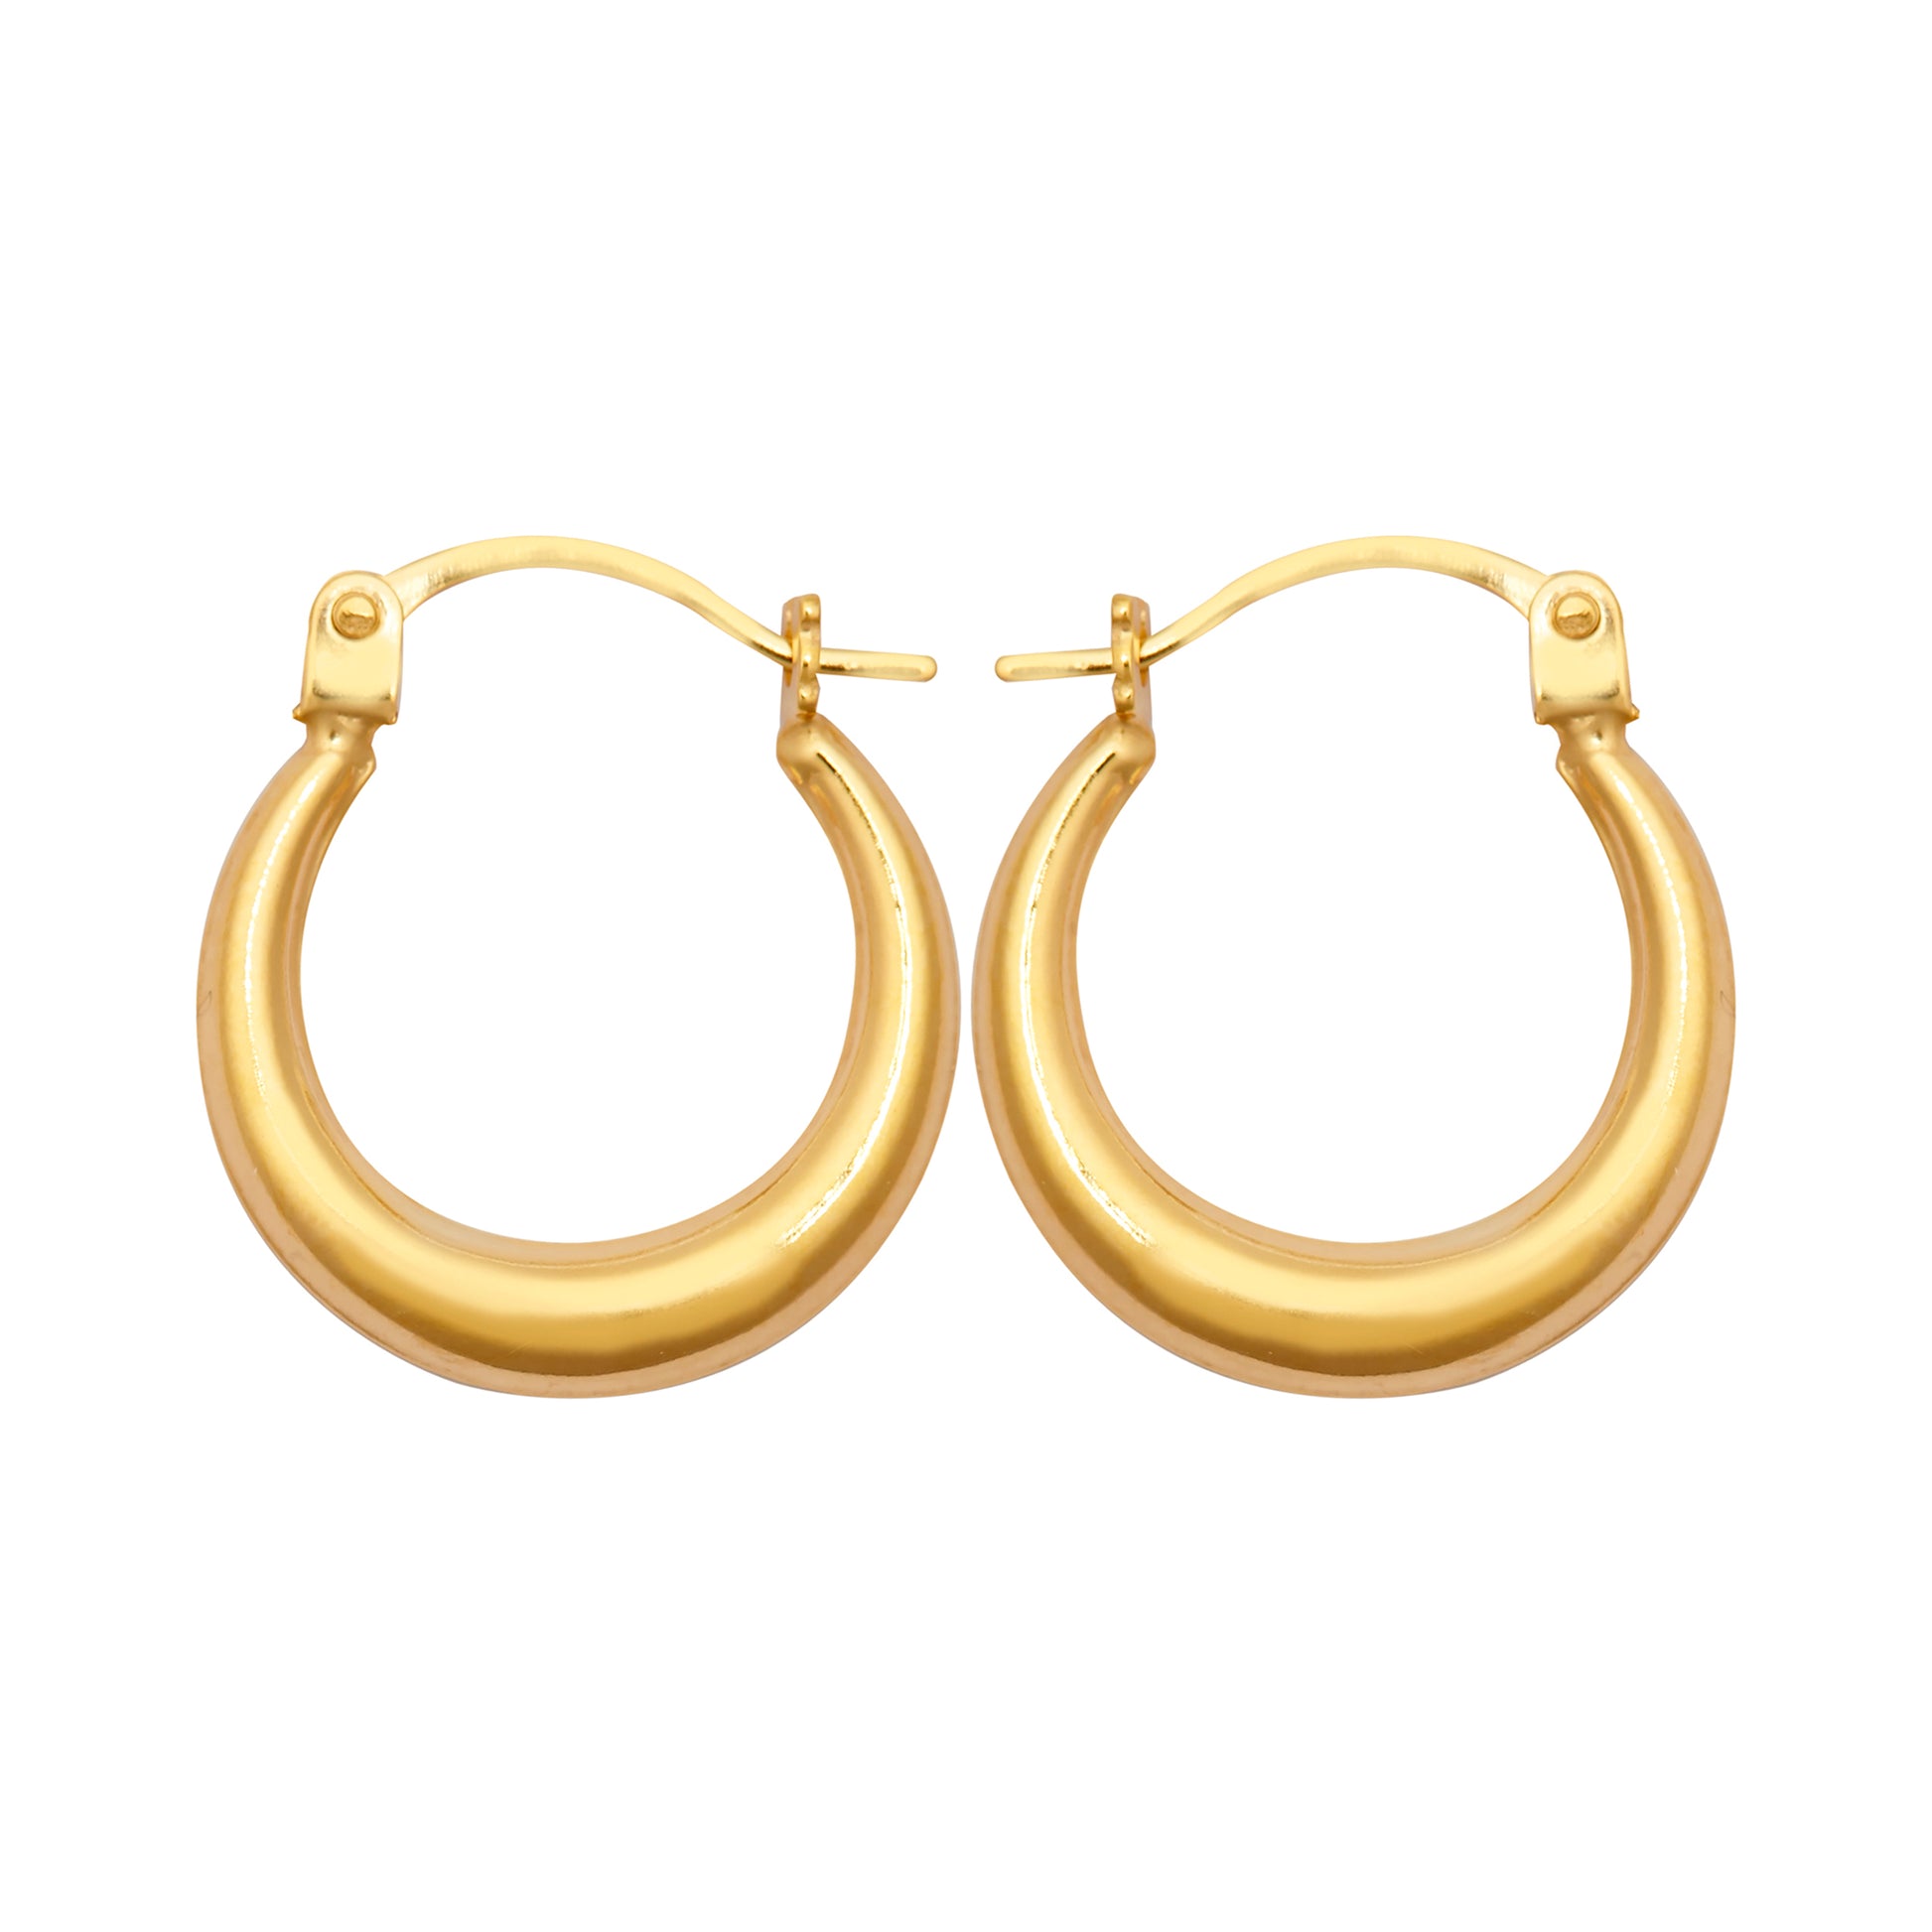 Ladies 9ct Gold  Graduating Crescent Moon Creole Earrings - JER792A